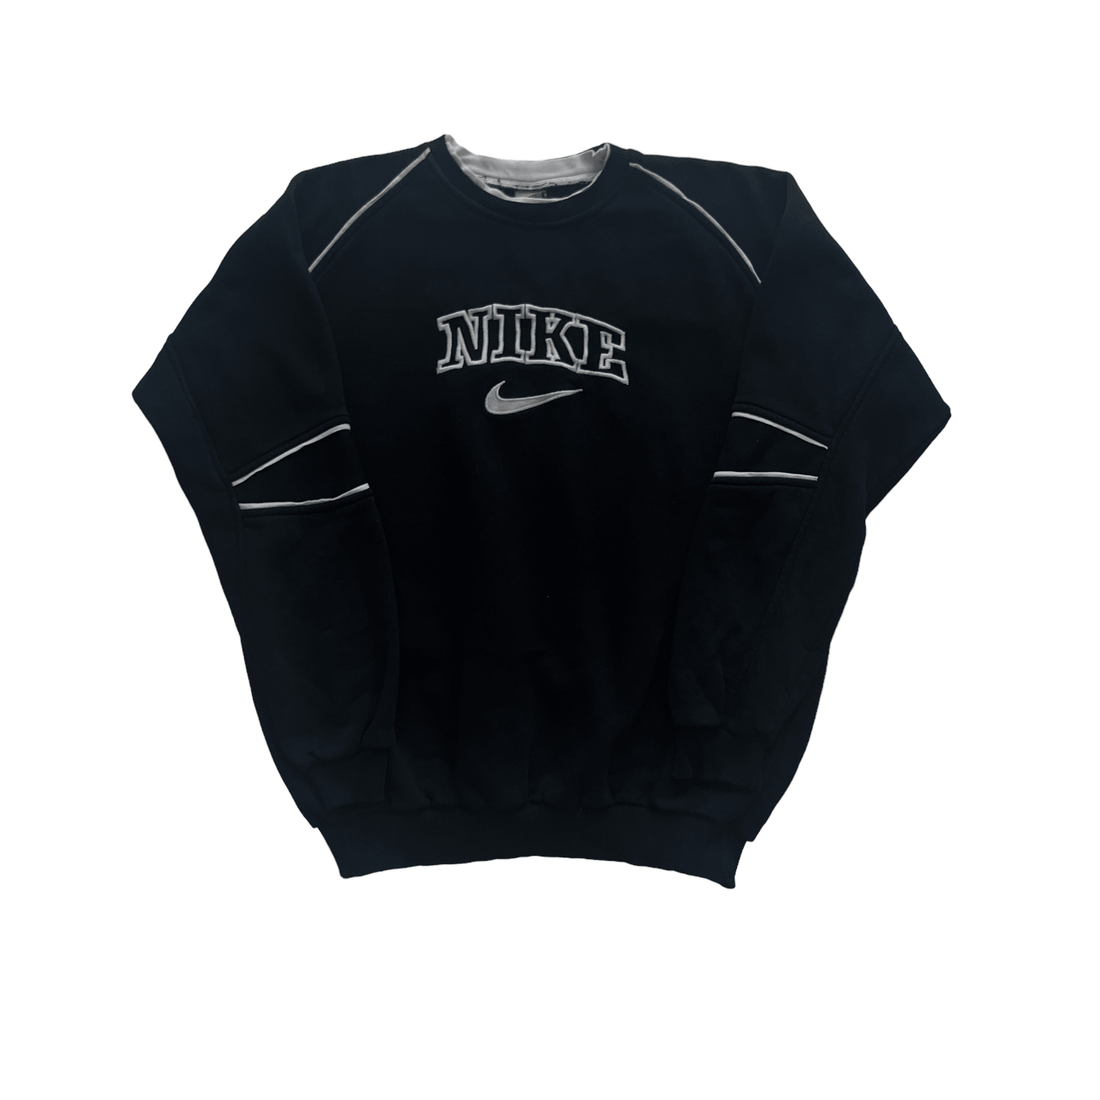 Vintage 90s Black Nike Spell-Out Sweatshirt - Extra Large (Recommended Size - Large) - The Streetwear Studio